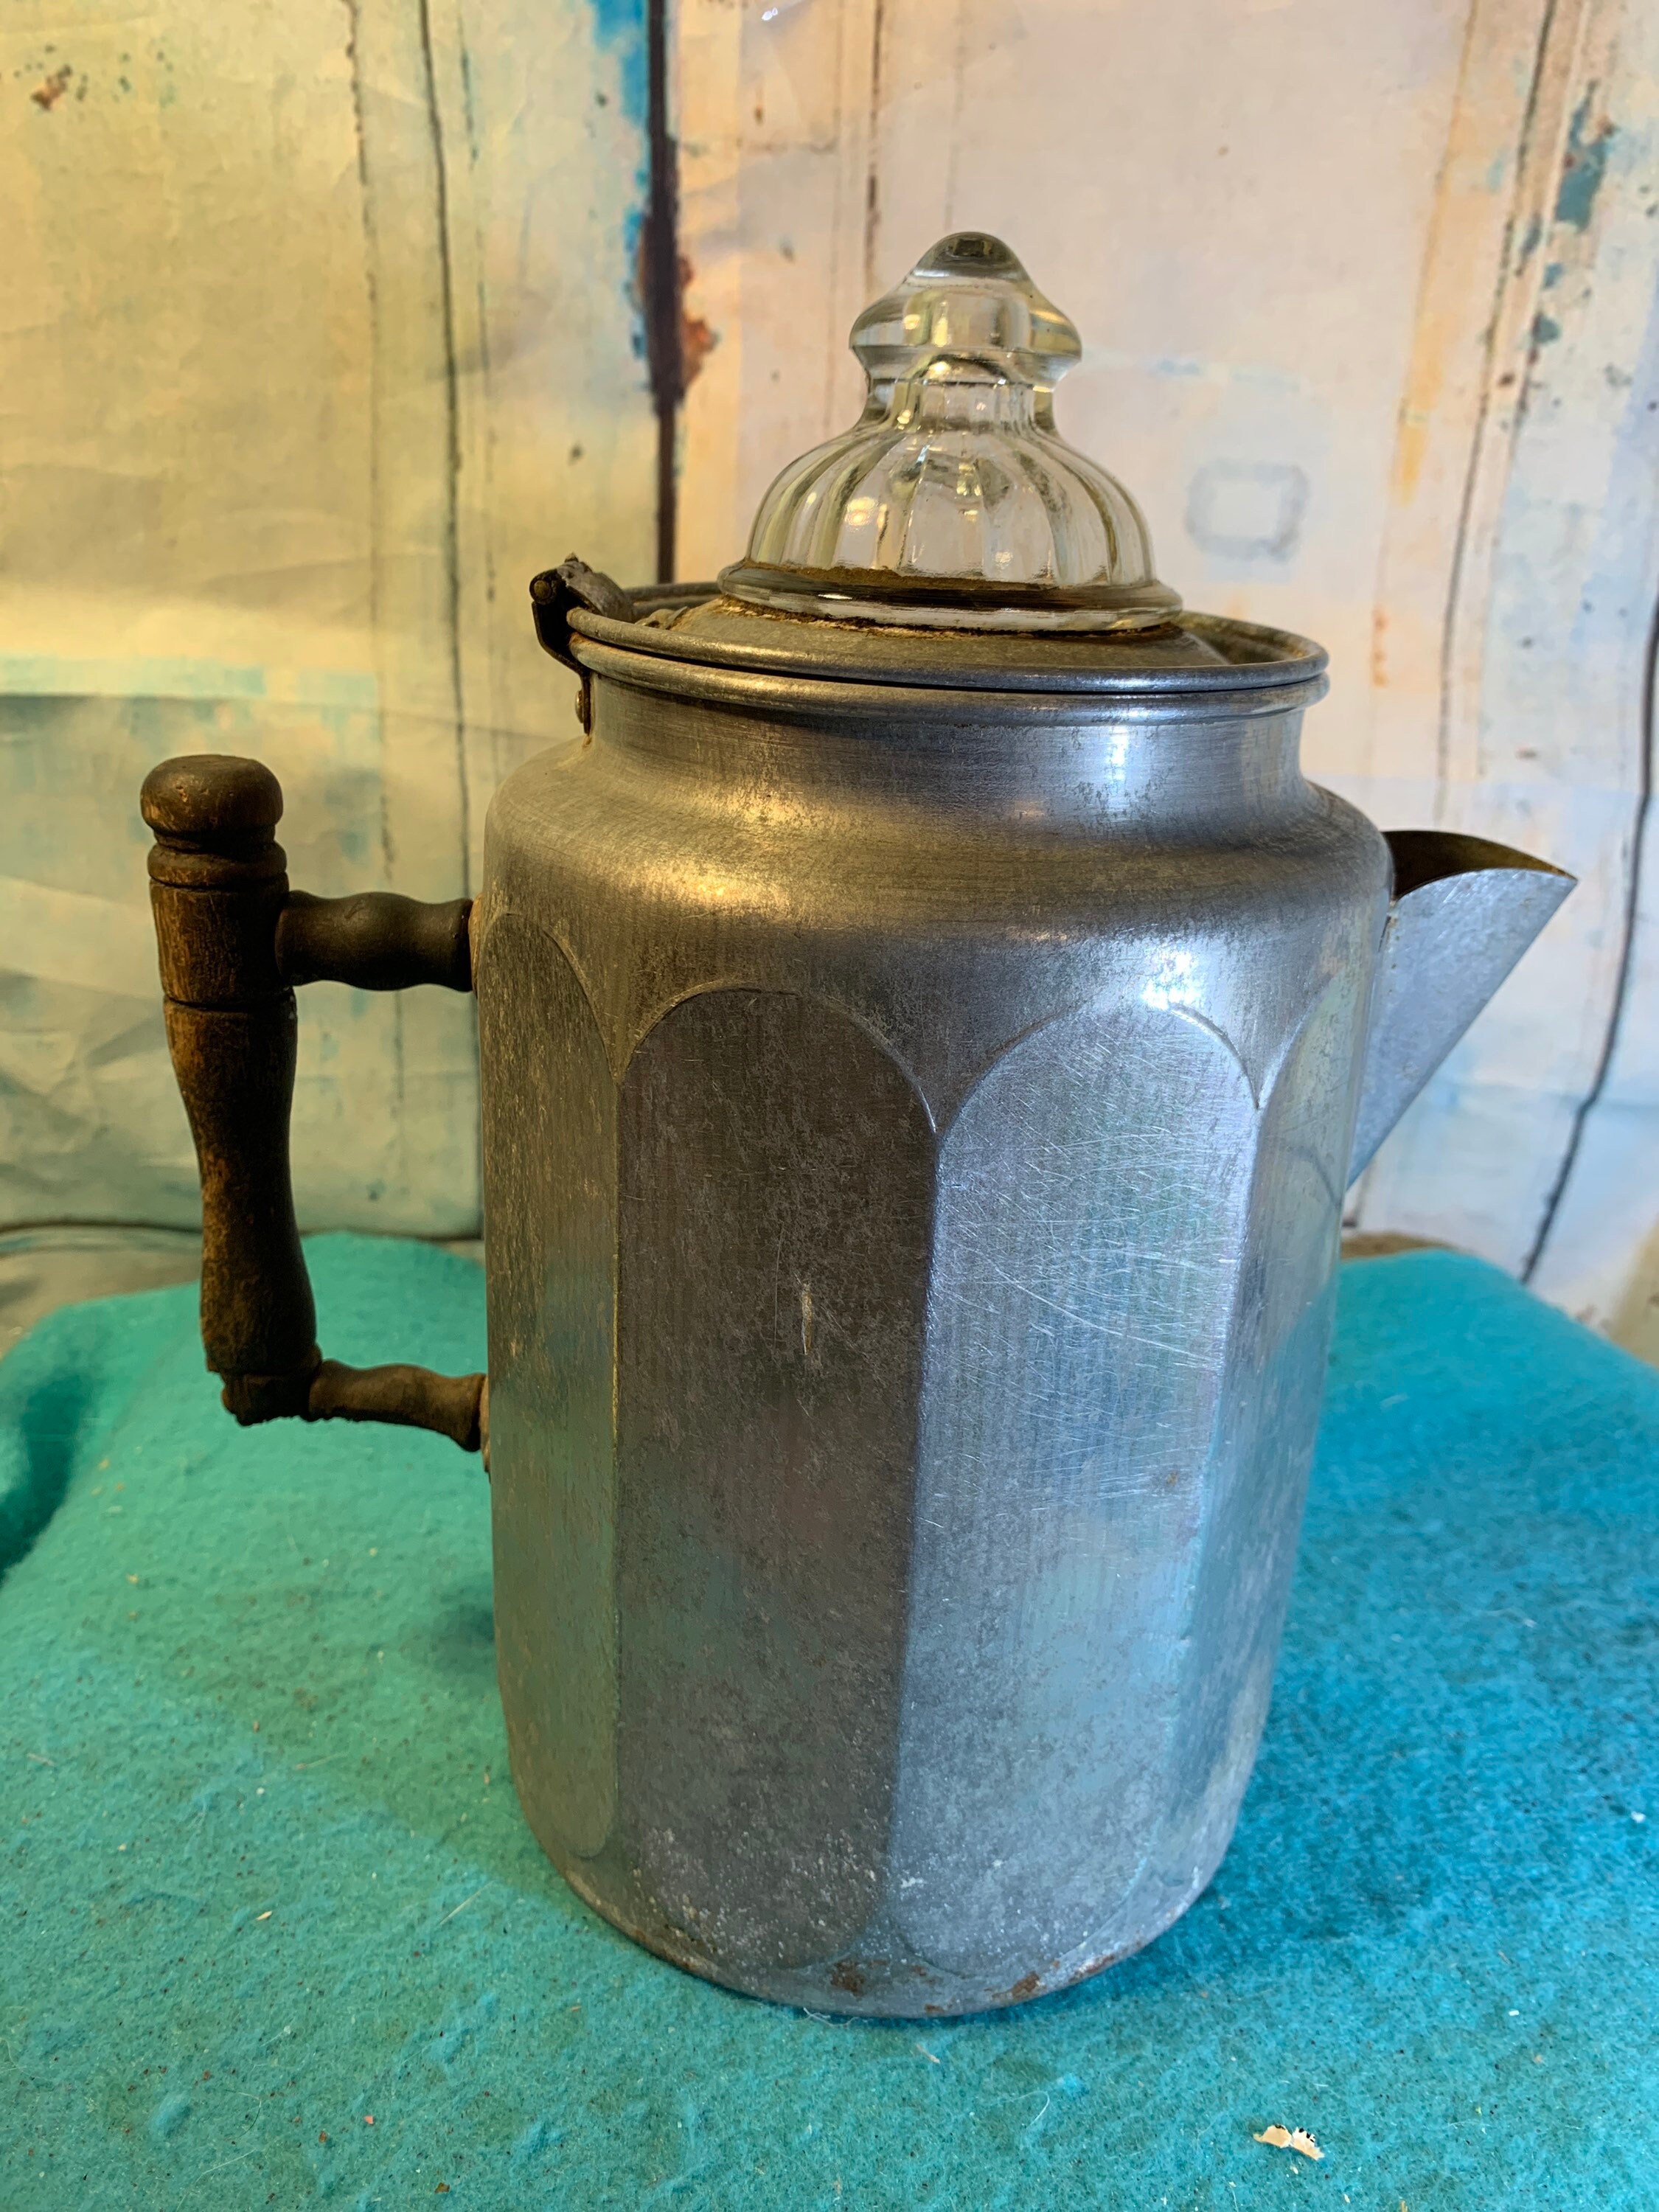 Antique Metal Ornate Detailed Coffee Pot (5002857)